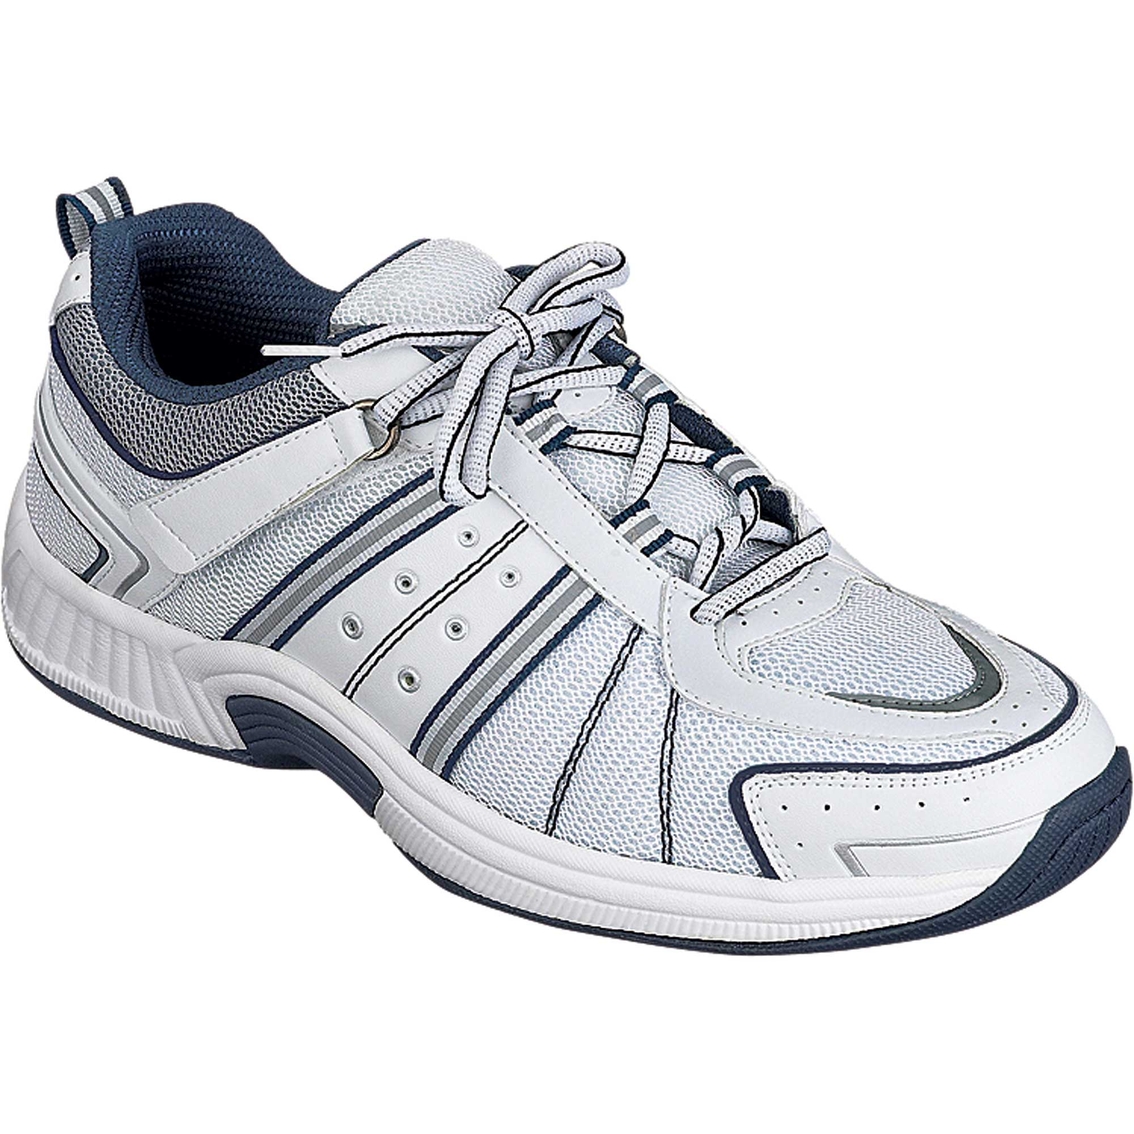 Orthofeet Men's Monterey Bay Tieless Sneakers | Sneakers | Shoes | Shop ...